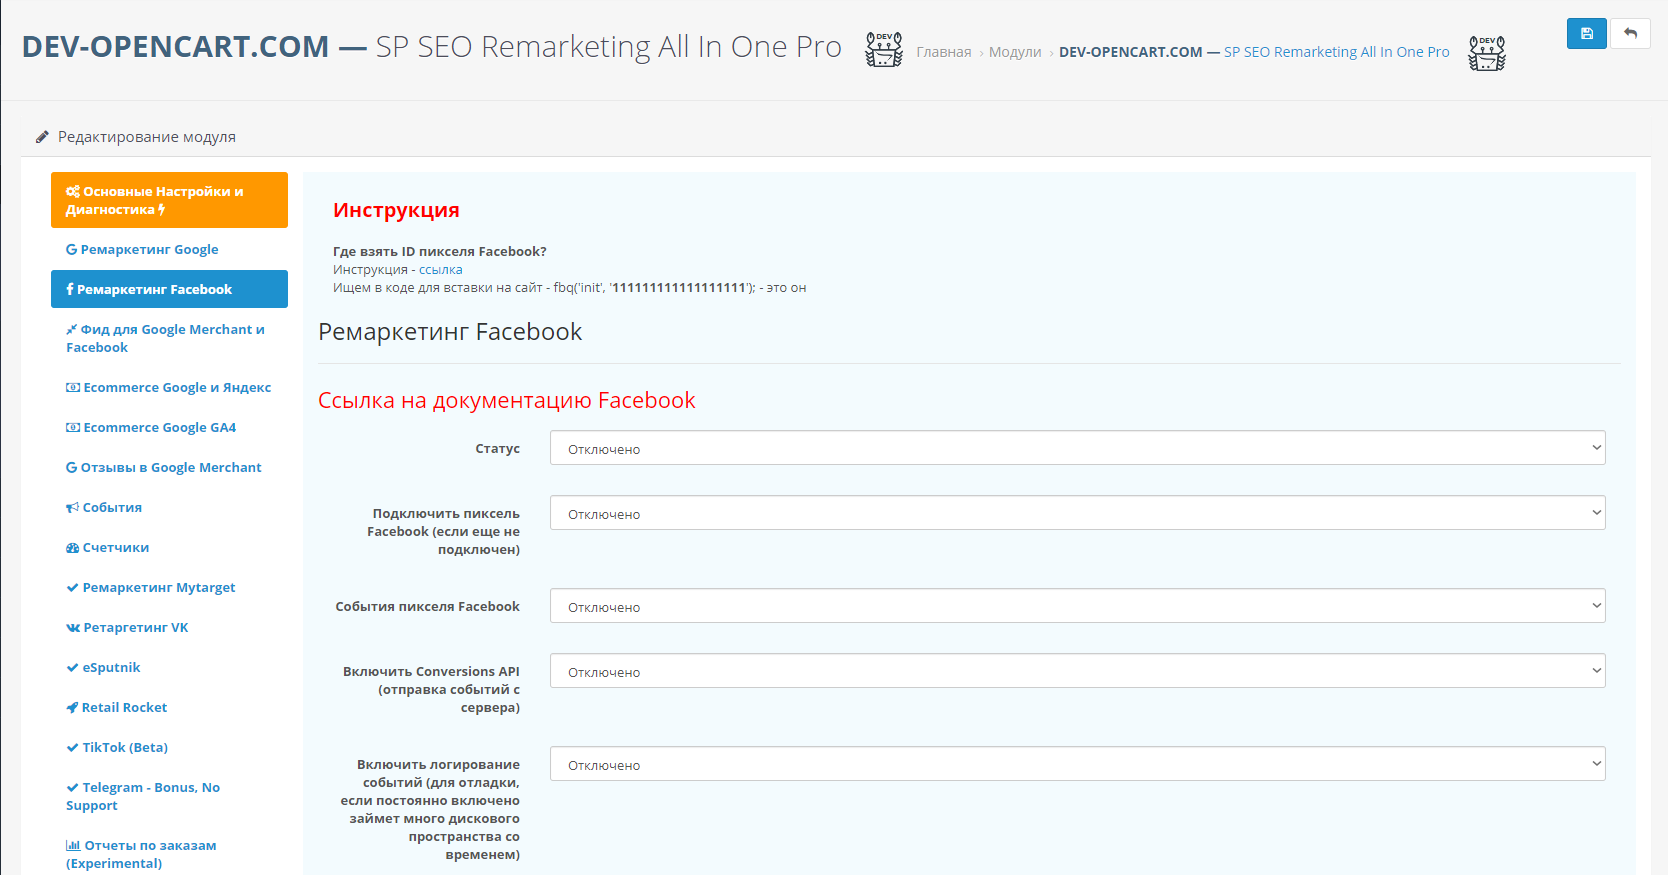 SP SEO Remarketing All In One Pro